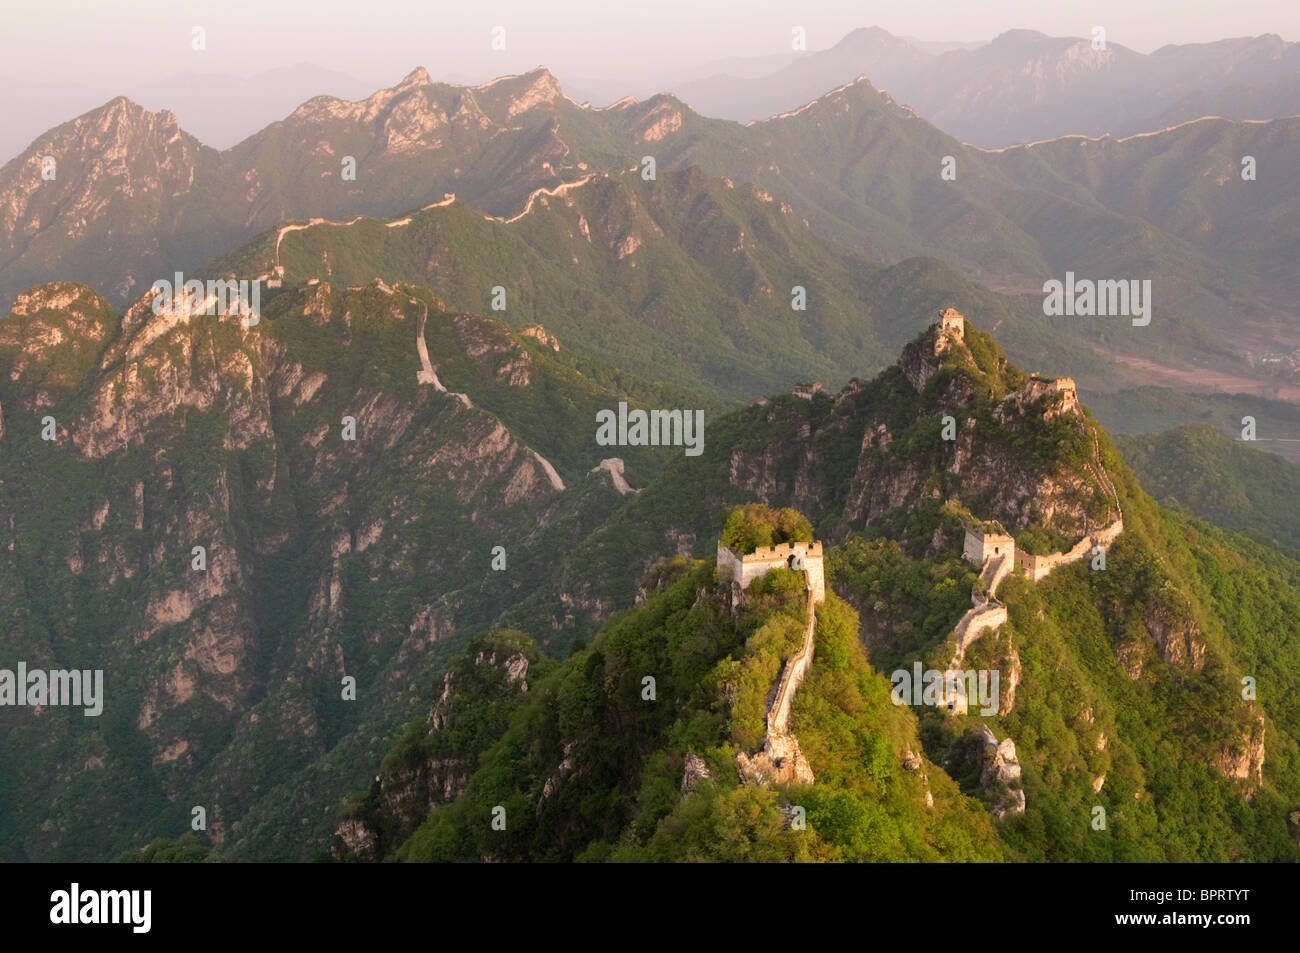 Wild wall portion of the Great Wall of China Stock Photo